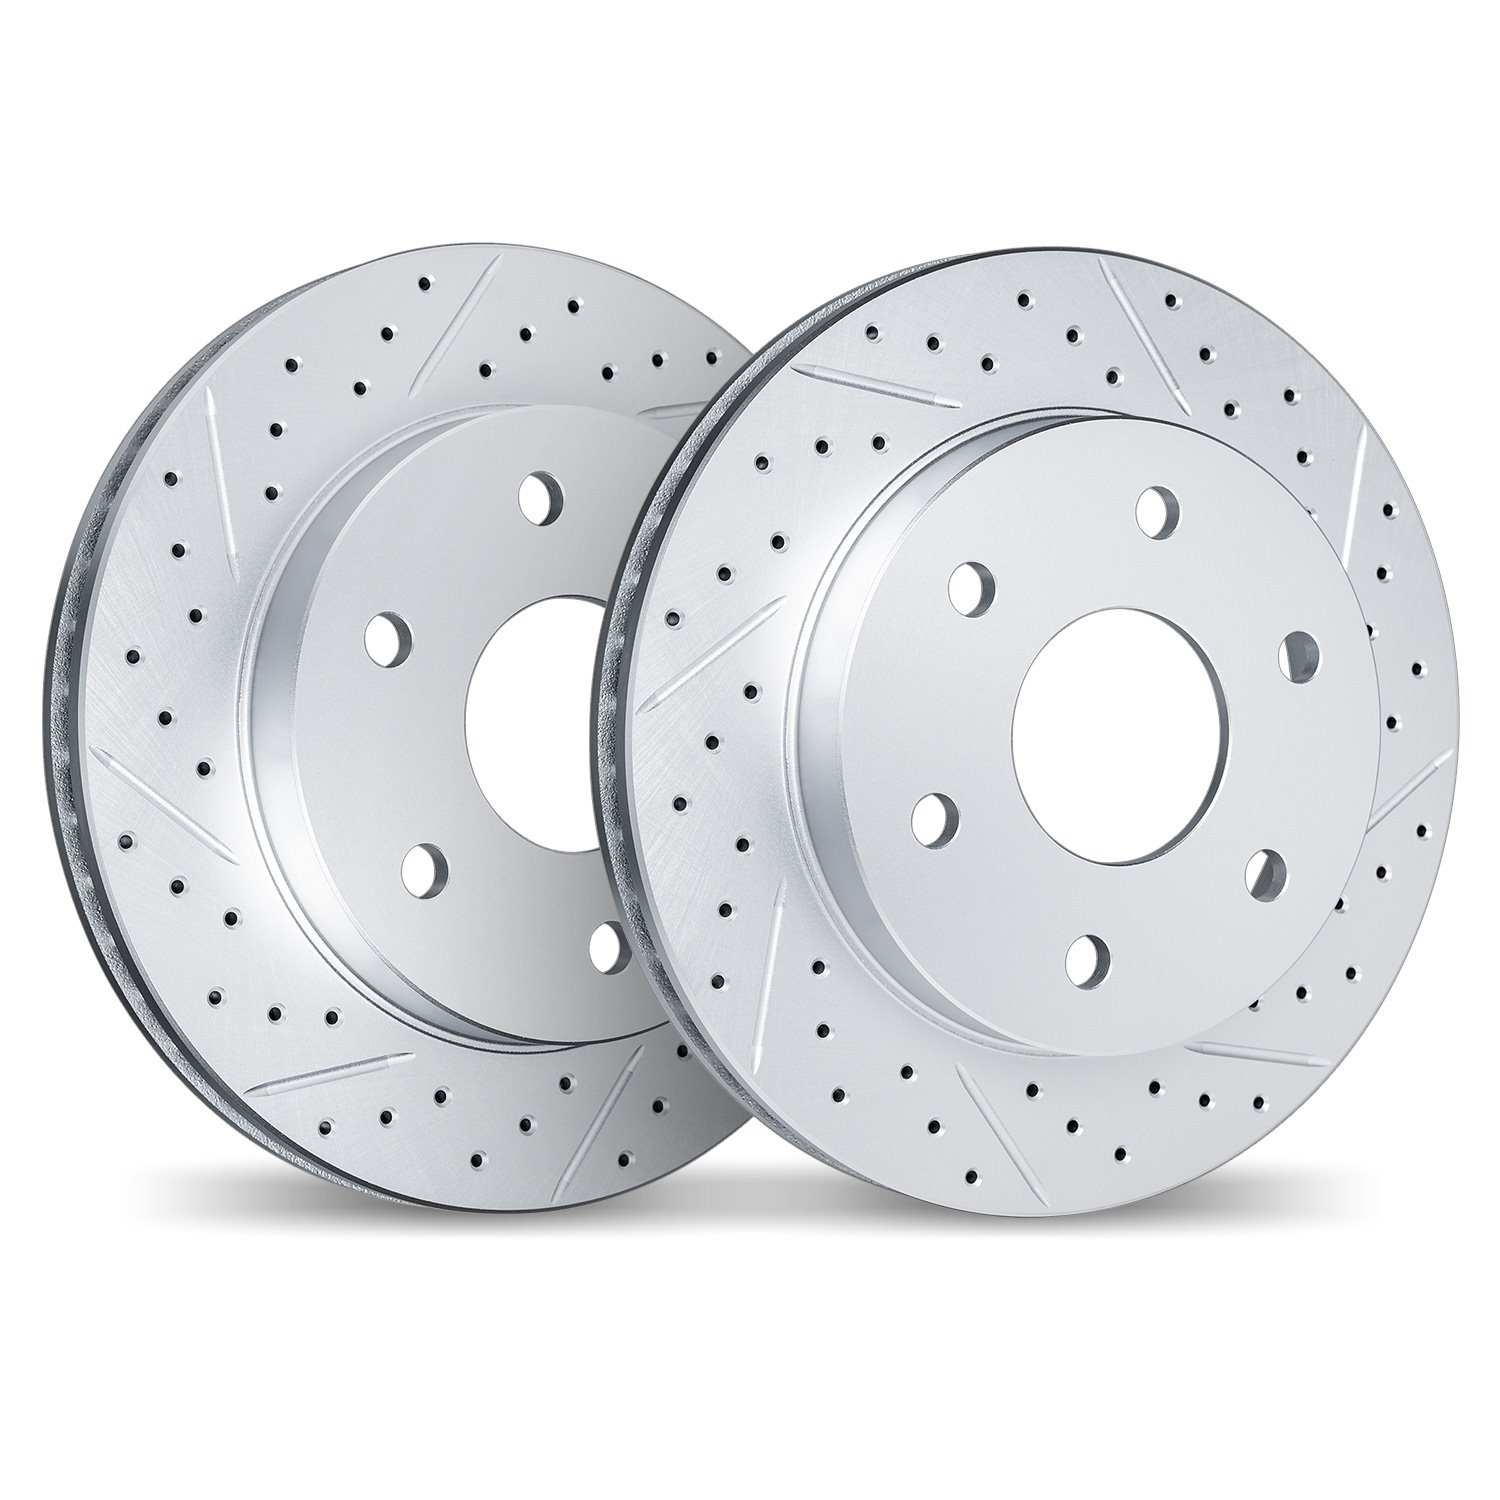 2002-46018 Geoperformance Drilled/Slotted Brake Rotors, 2004-2009 GM, Position: Front